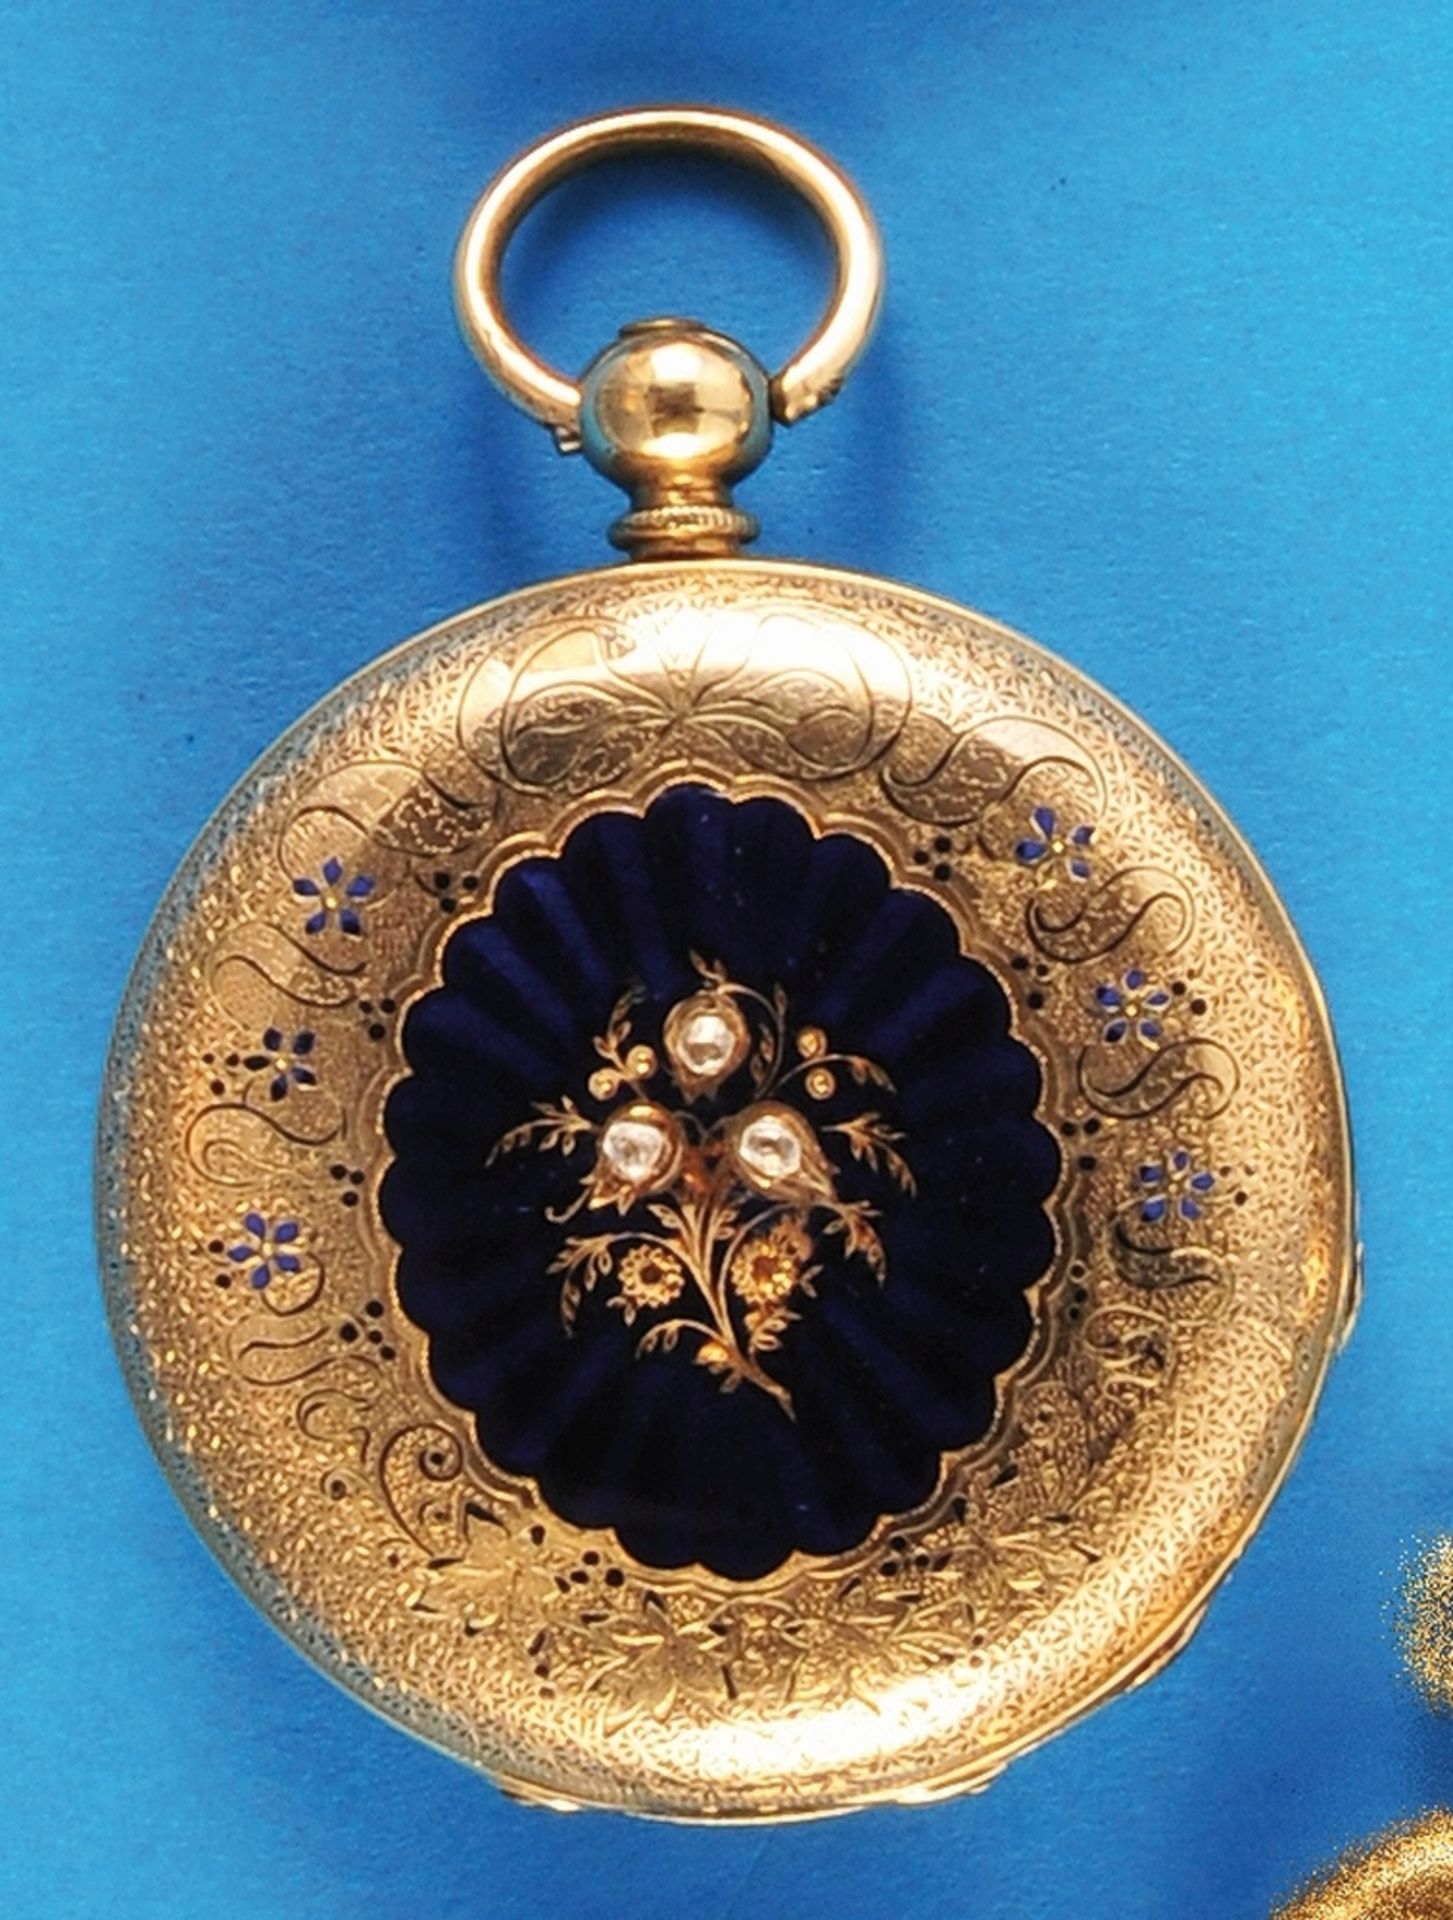 Gold enamel pocket watch with jumping cover and key winding, all sides chased 14 ct. 3-lid gold case